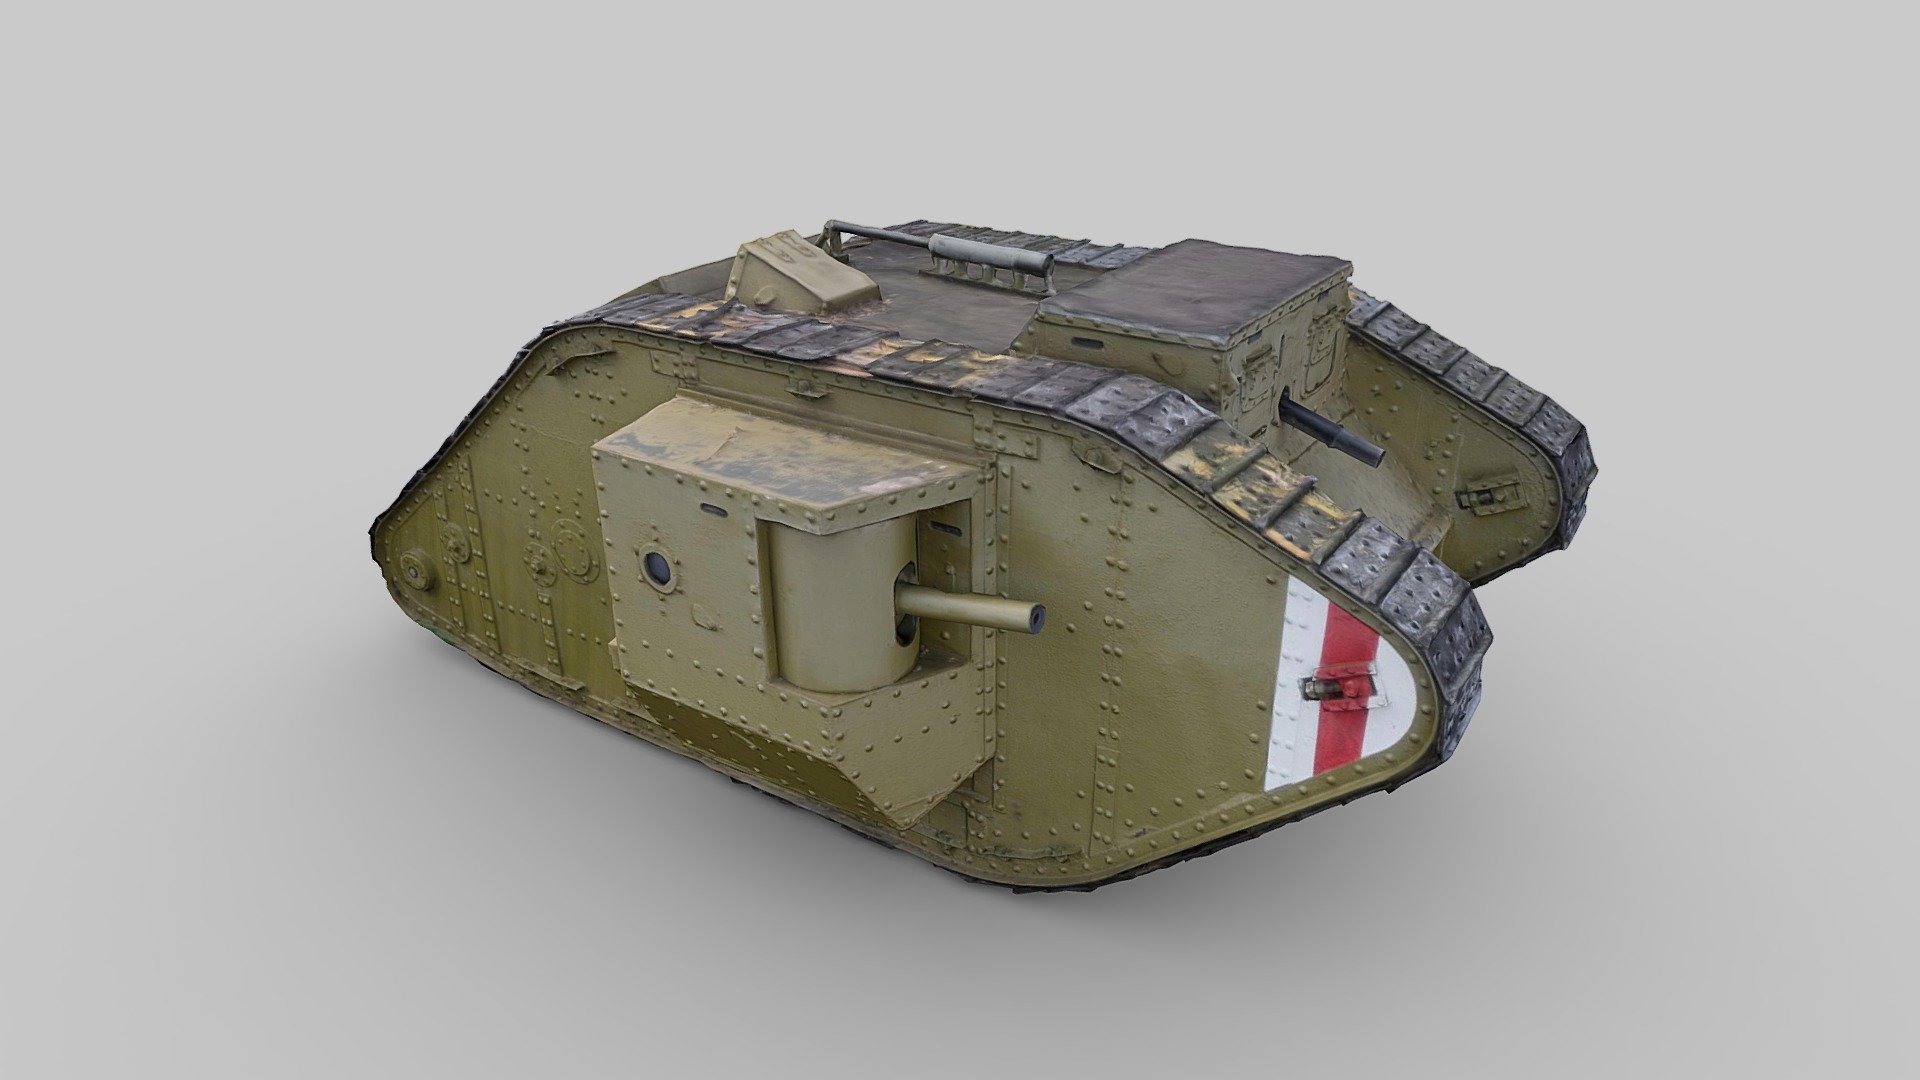 Photogrammetry capture of the body of a replica First World War Mark IV tank located towards the north east corner of Cedars Park, Waltham Cross.

Replica by Dr Tony Cooke and Kevin Jepson (2006):
https://www.keymilitary.com/article/new-presentation-tank-waltham-cross

529 photos taken with a Sony a7R III and 211 photos taken with a GoPro Hero 11 Black. Processed in Reality Capture. Underside heavily recreated/repainted in Mudbox.

Texture: 4096 x 4096 pixels diffuse 3d model